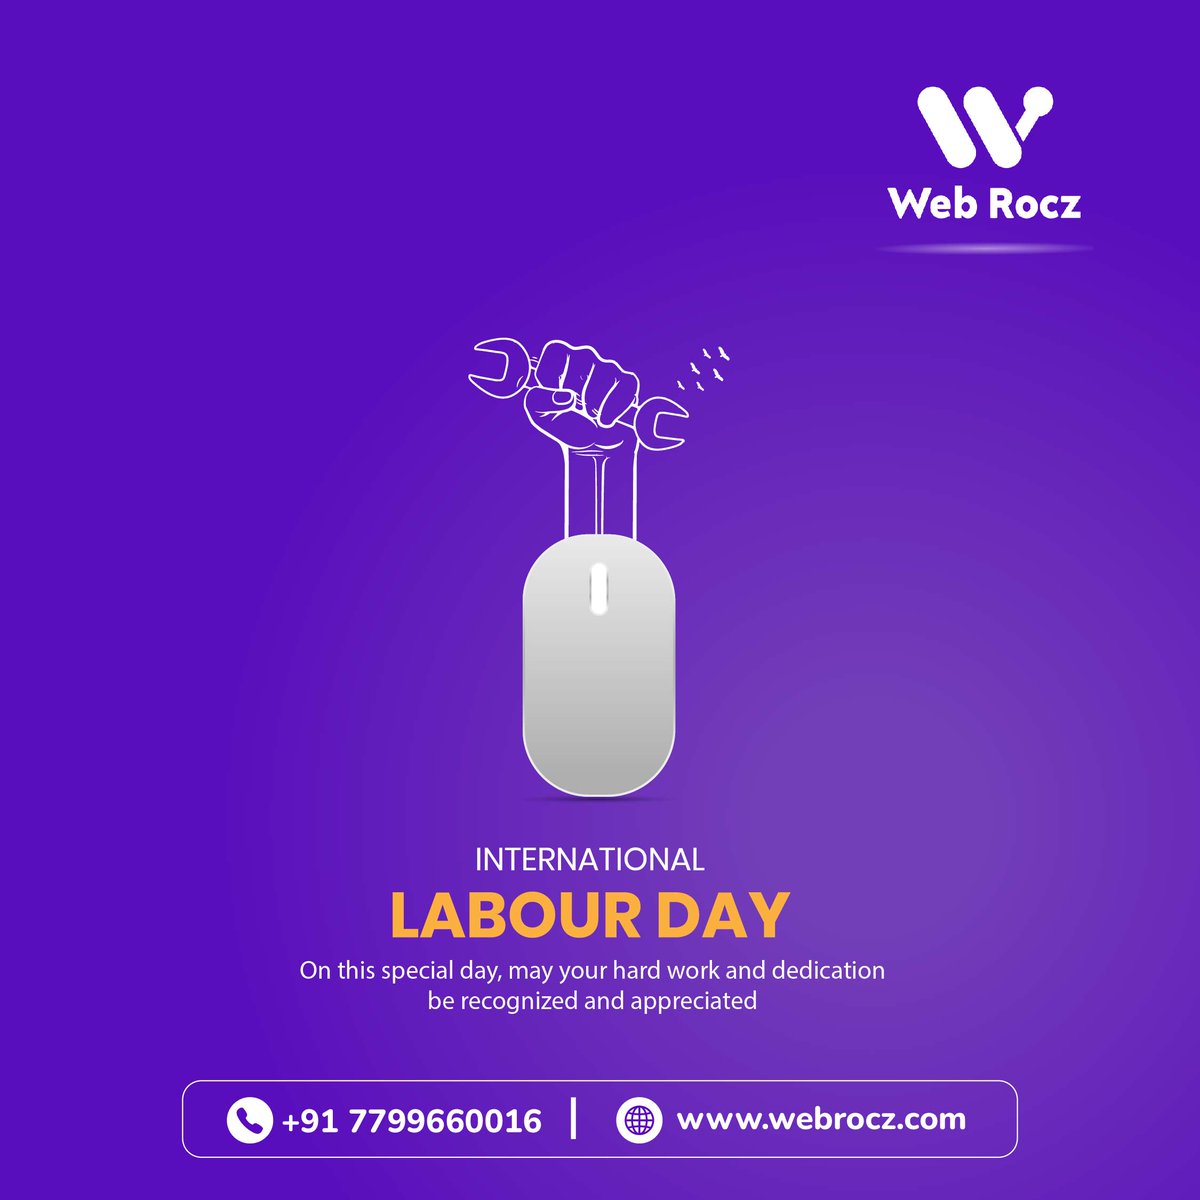 Happy May Day! 🌸Take a step forward in your web design journey with Web Rocz. 💻 Embrace creativity, learn new techniques, and #UnlockYourPotential.
#webdesign #codingcommunity #webdevelopment #mayday #webworkshop #creativity #digitalart #learncoding #techtraining #empowerment